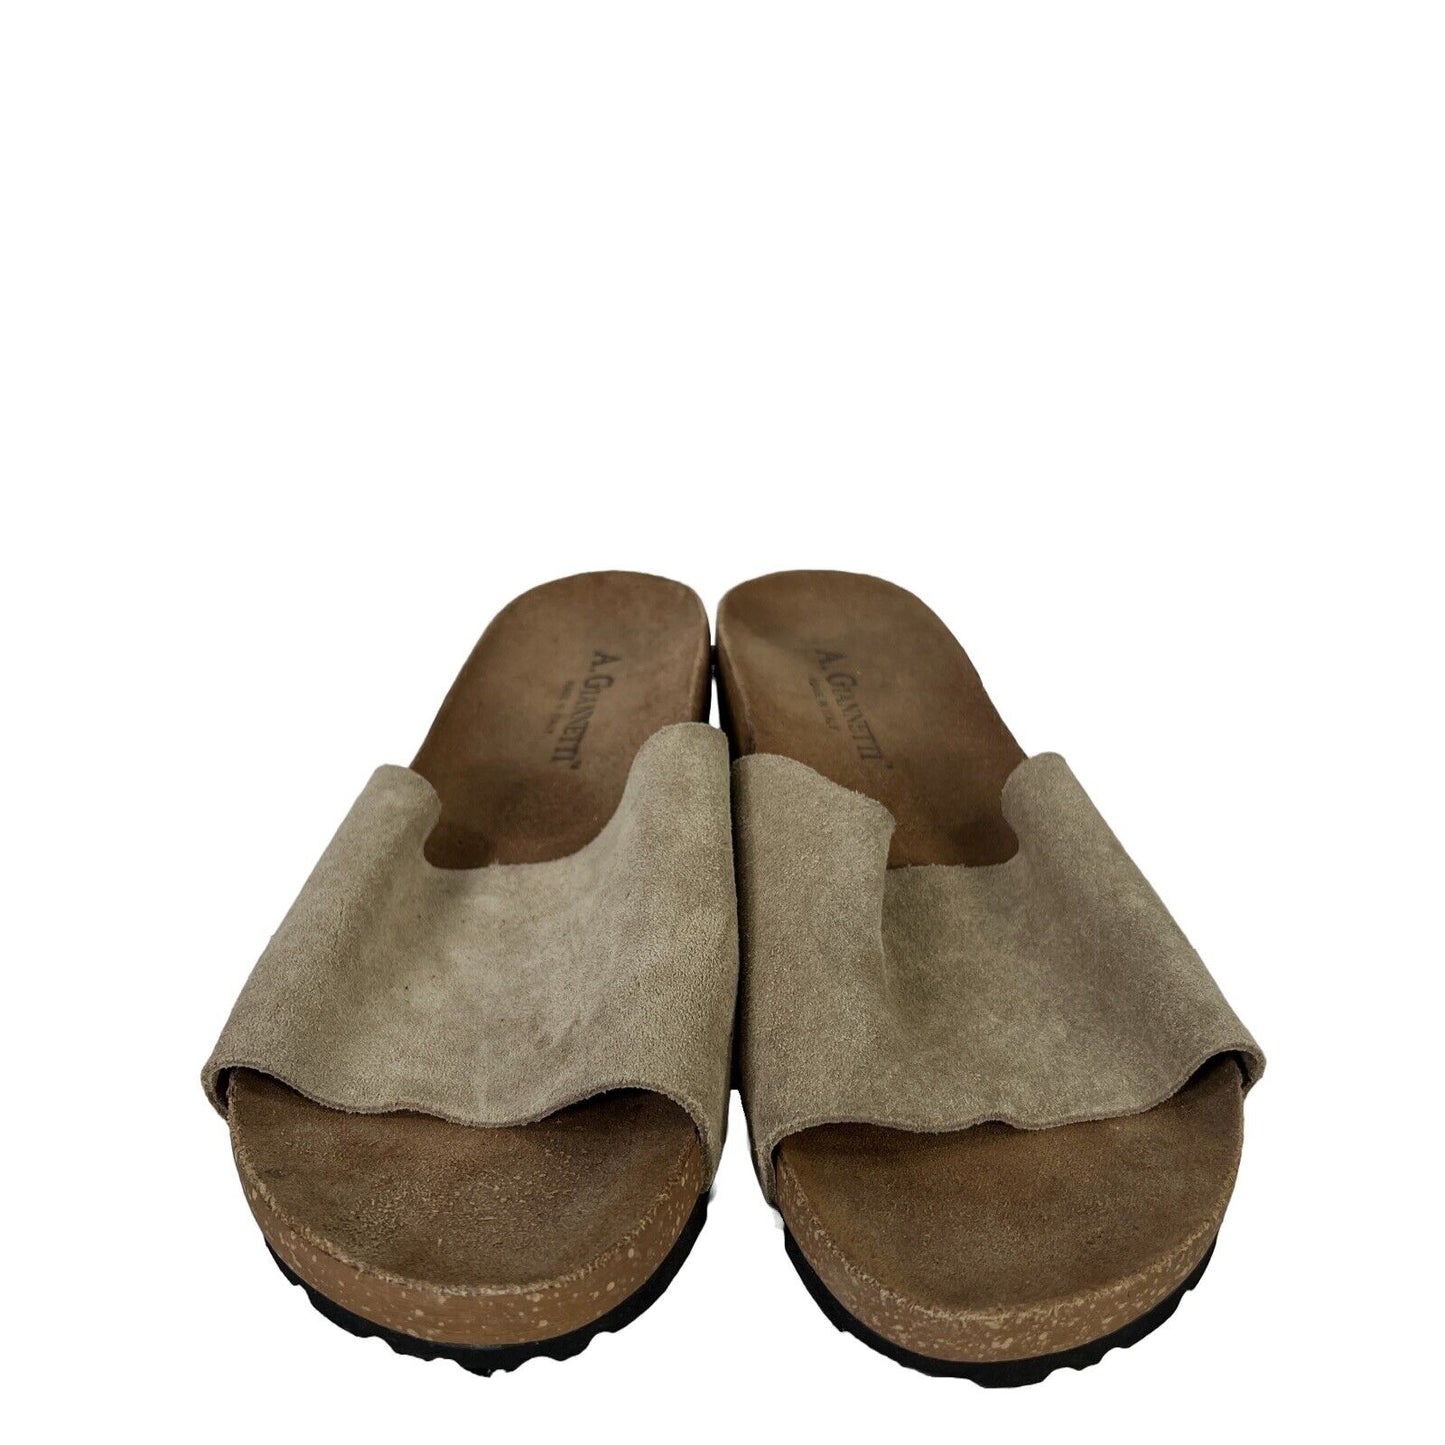 A Giannetti Women's Tan/Brown Suede Wedge Sandals - 8